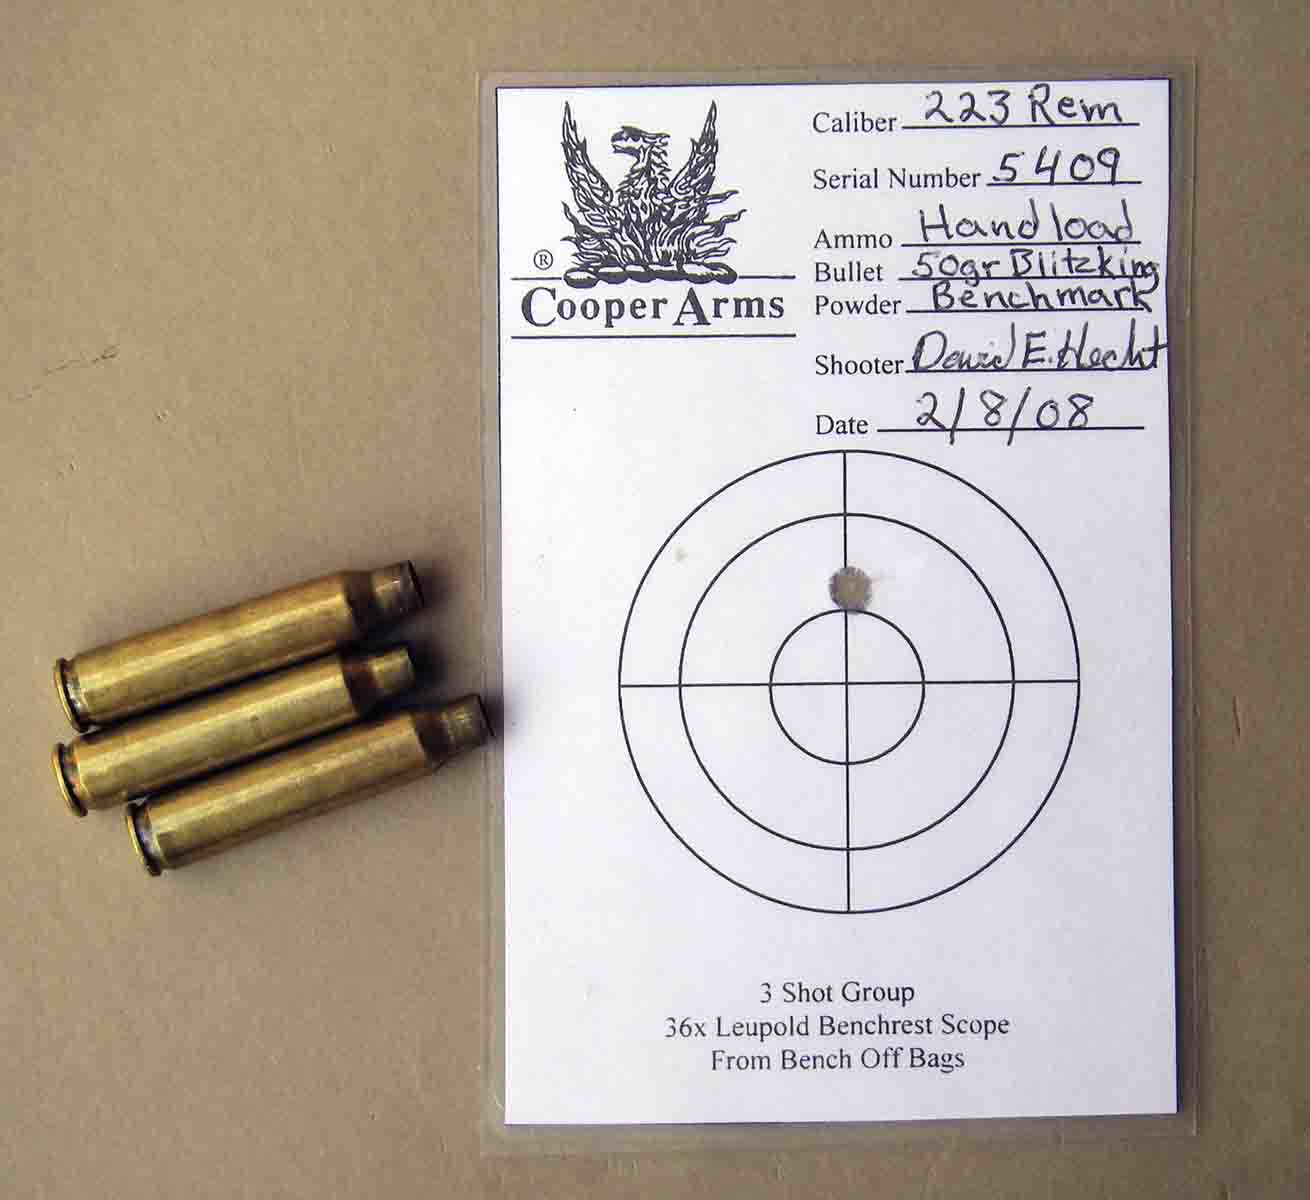 This three-shot group fired from a Cooper Arms Model 21 .223 Remington illustrates the accuracy potential of varmint-caliber handloads.